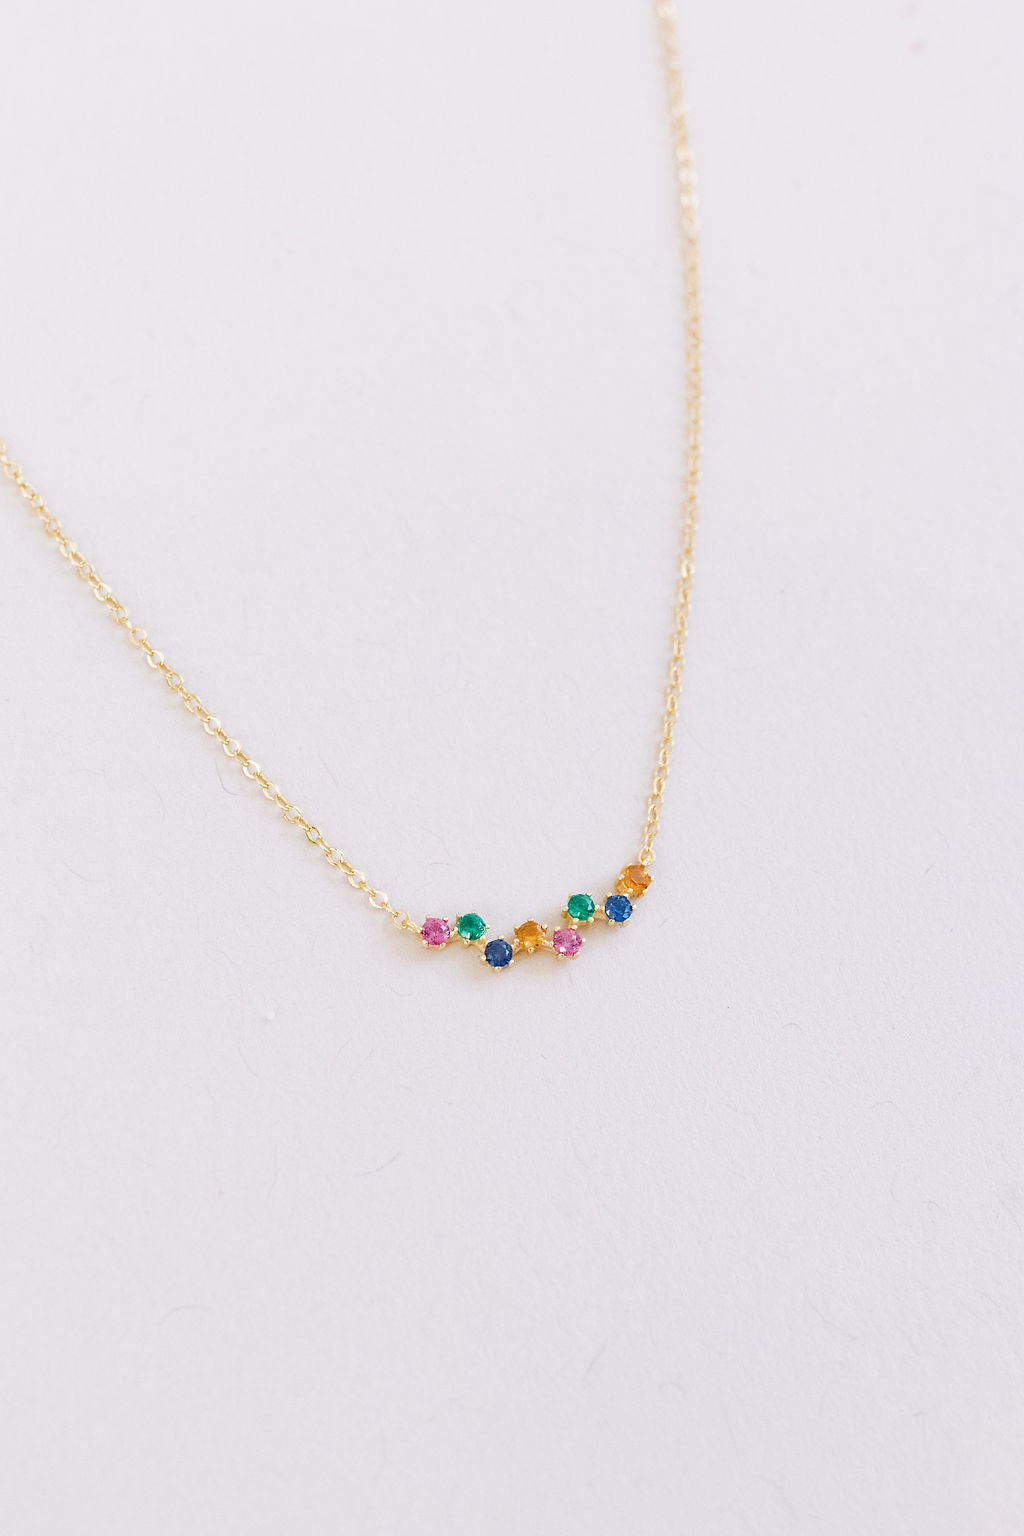 Asher Jewel Necklace - Poppy and Stella